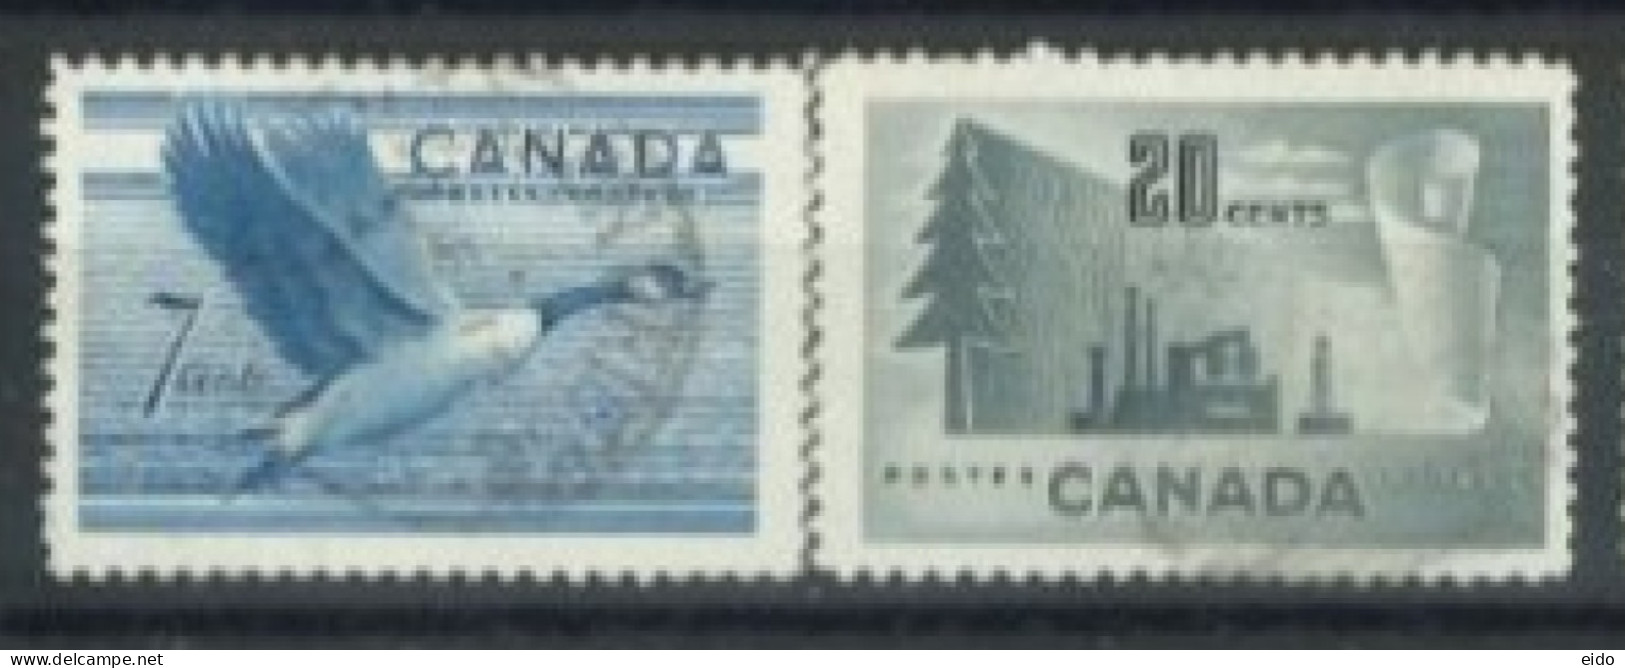 CANADA - 1951/52, CANADIAN GOOSE & FORESTY PRODUCTS STAMPS SET OF 2, USED. - Usati